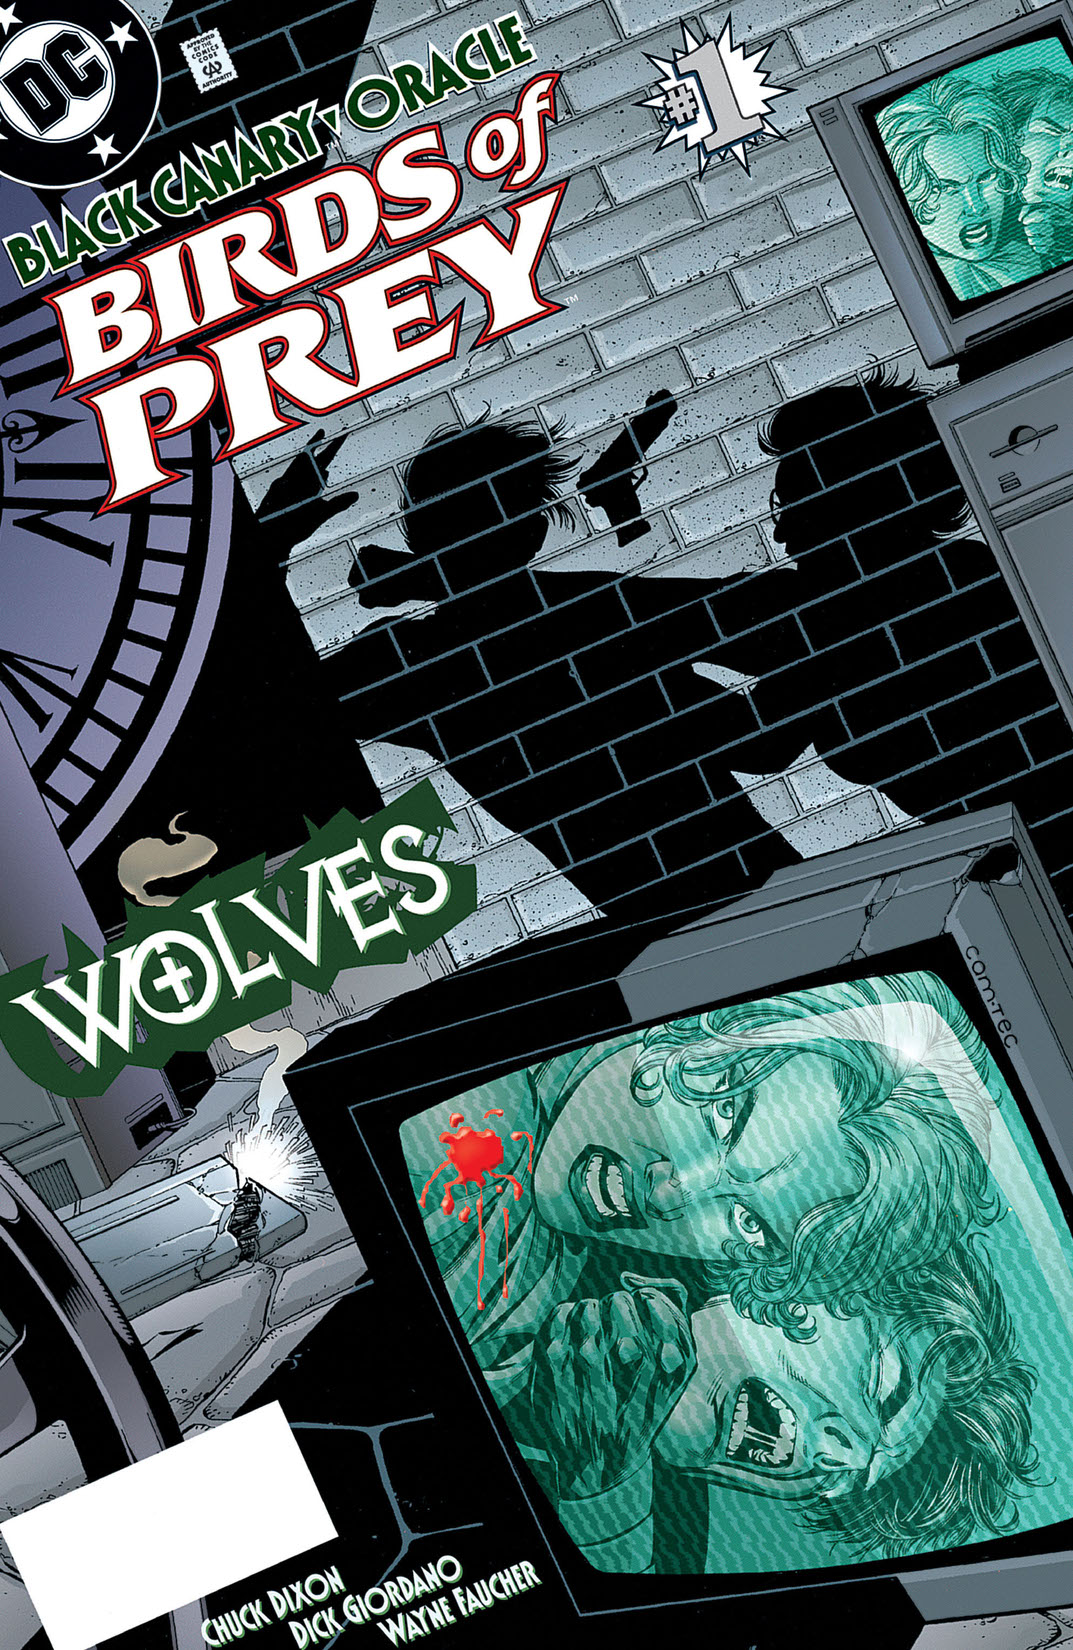 Birds of Prey: Wolves (1997-) #1 preview images